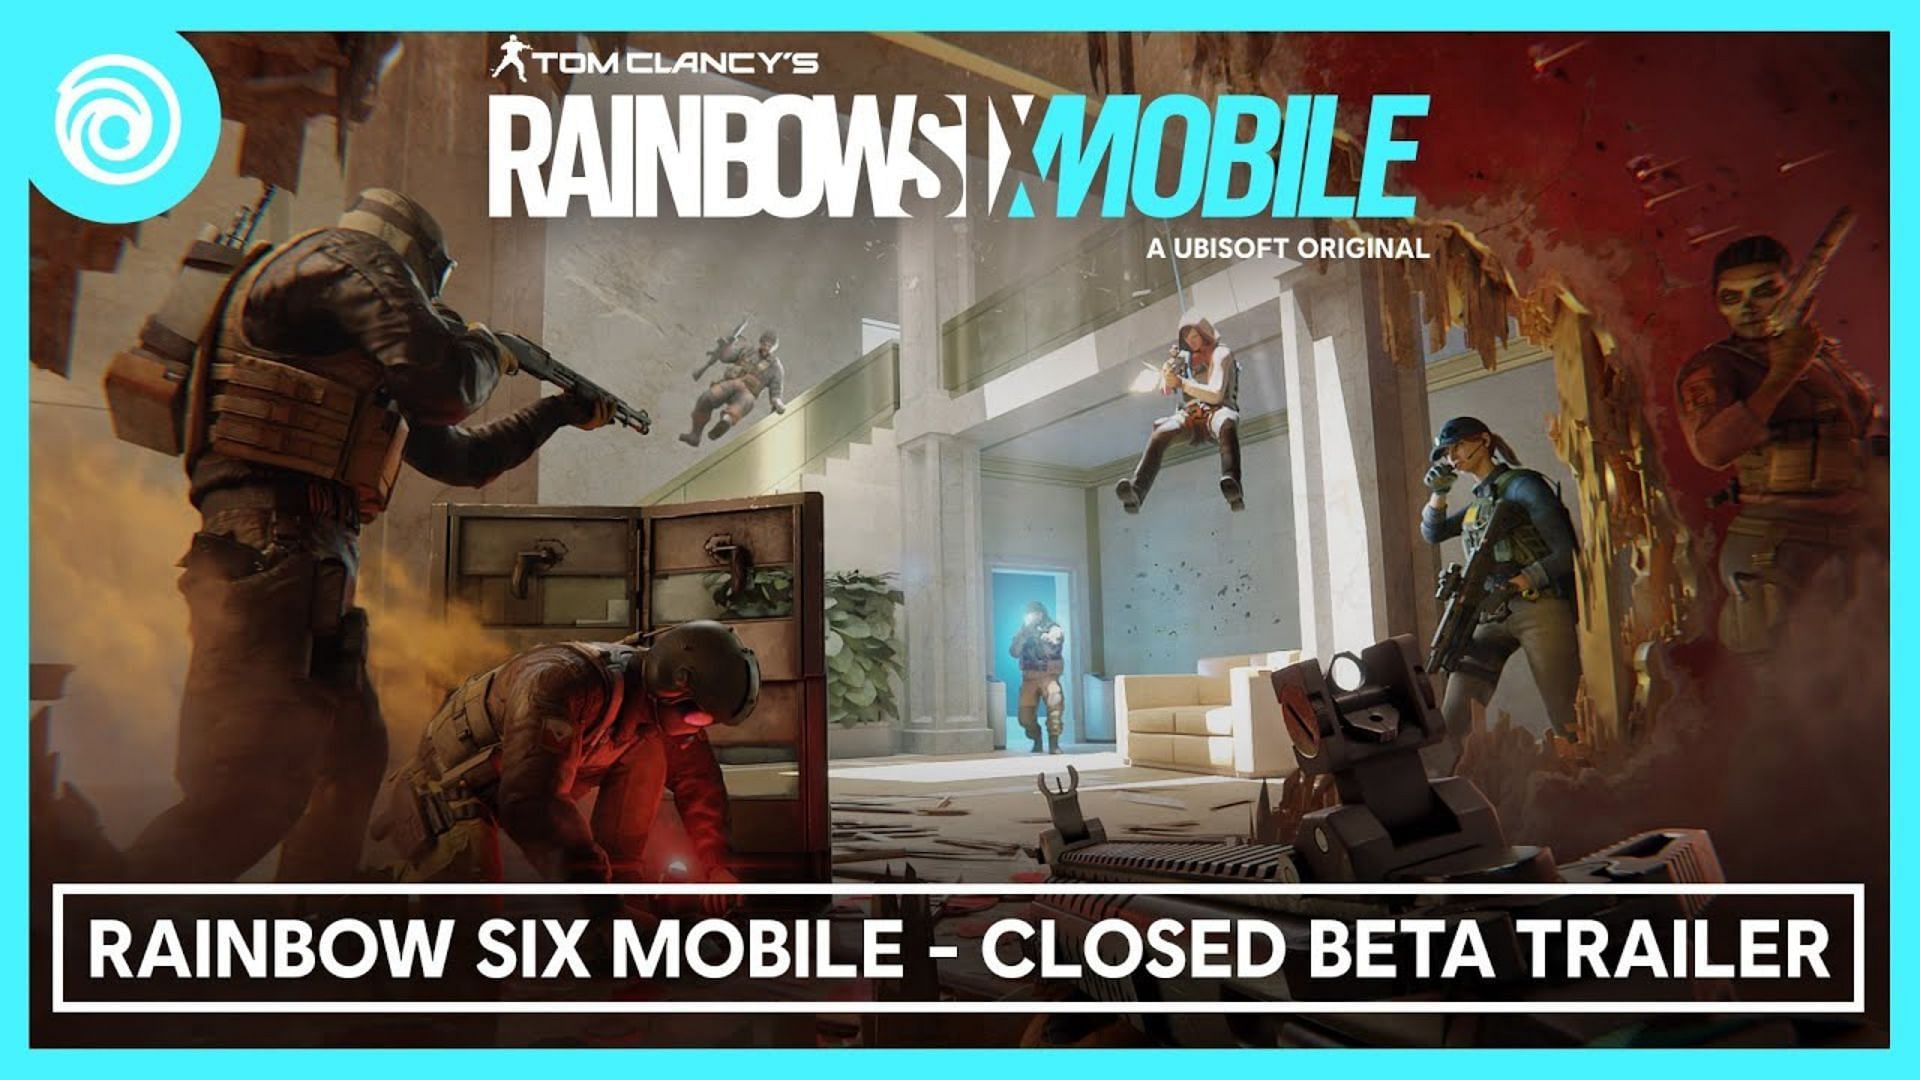 Rainbow Six Mobile on X: We've kicked off our Closed Beta 2.0